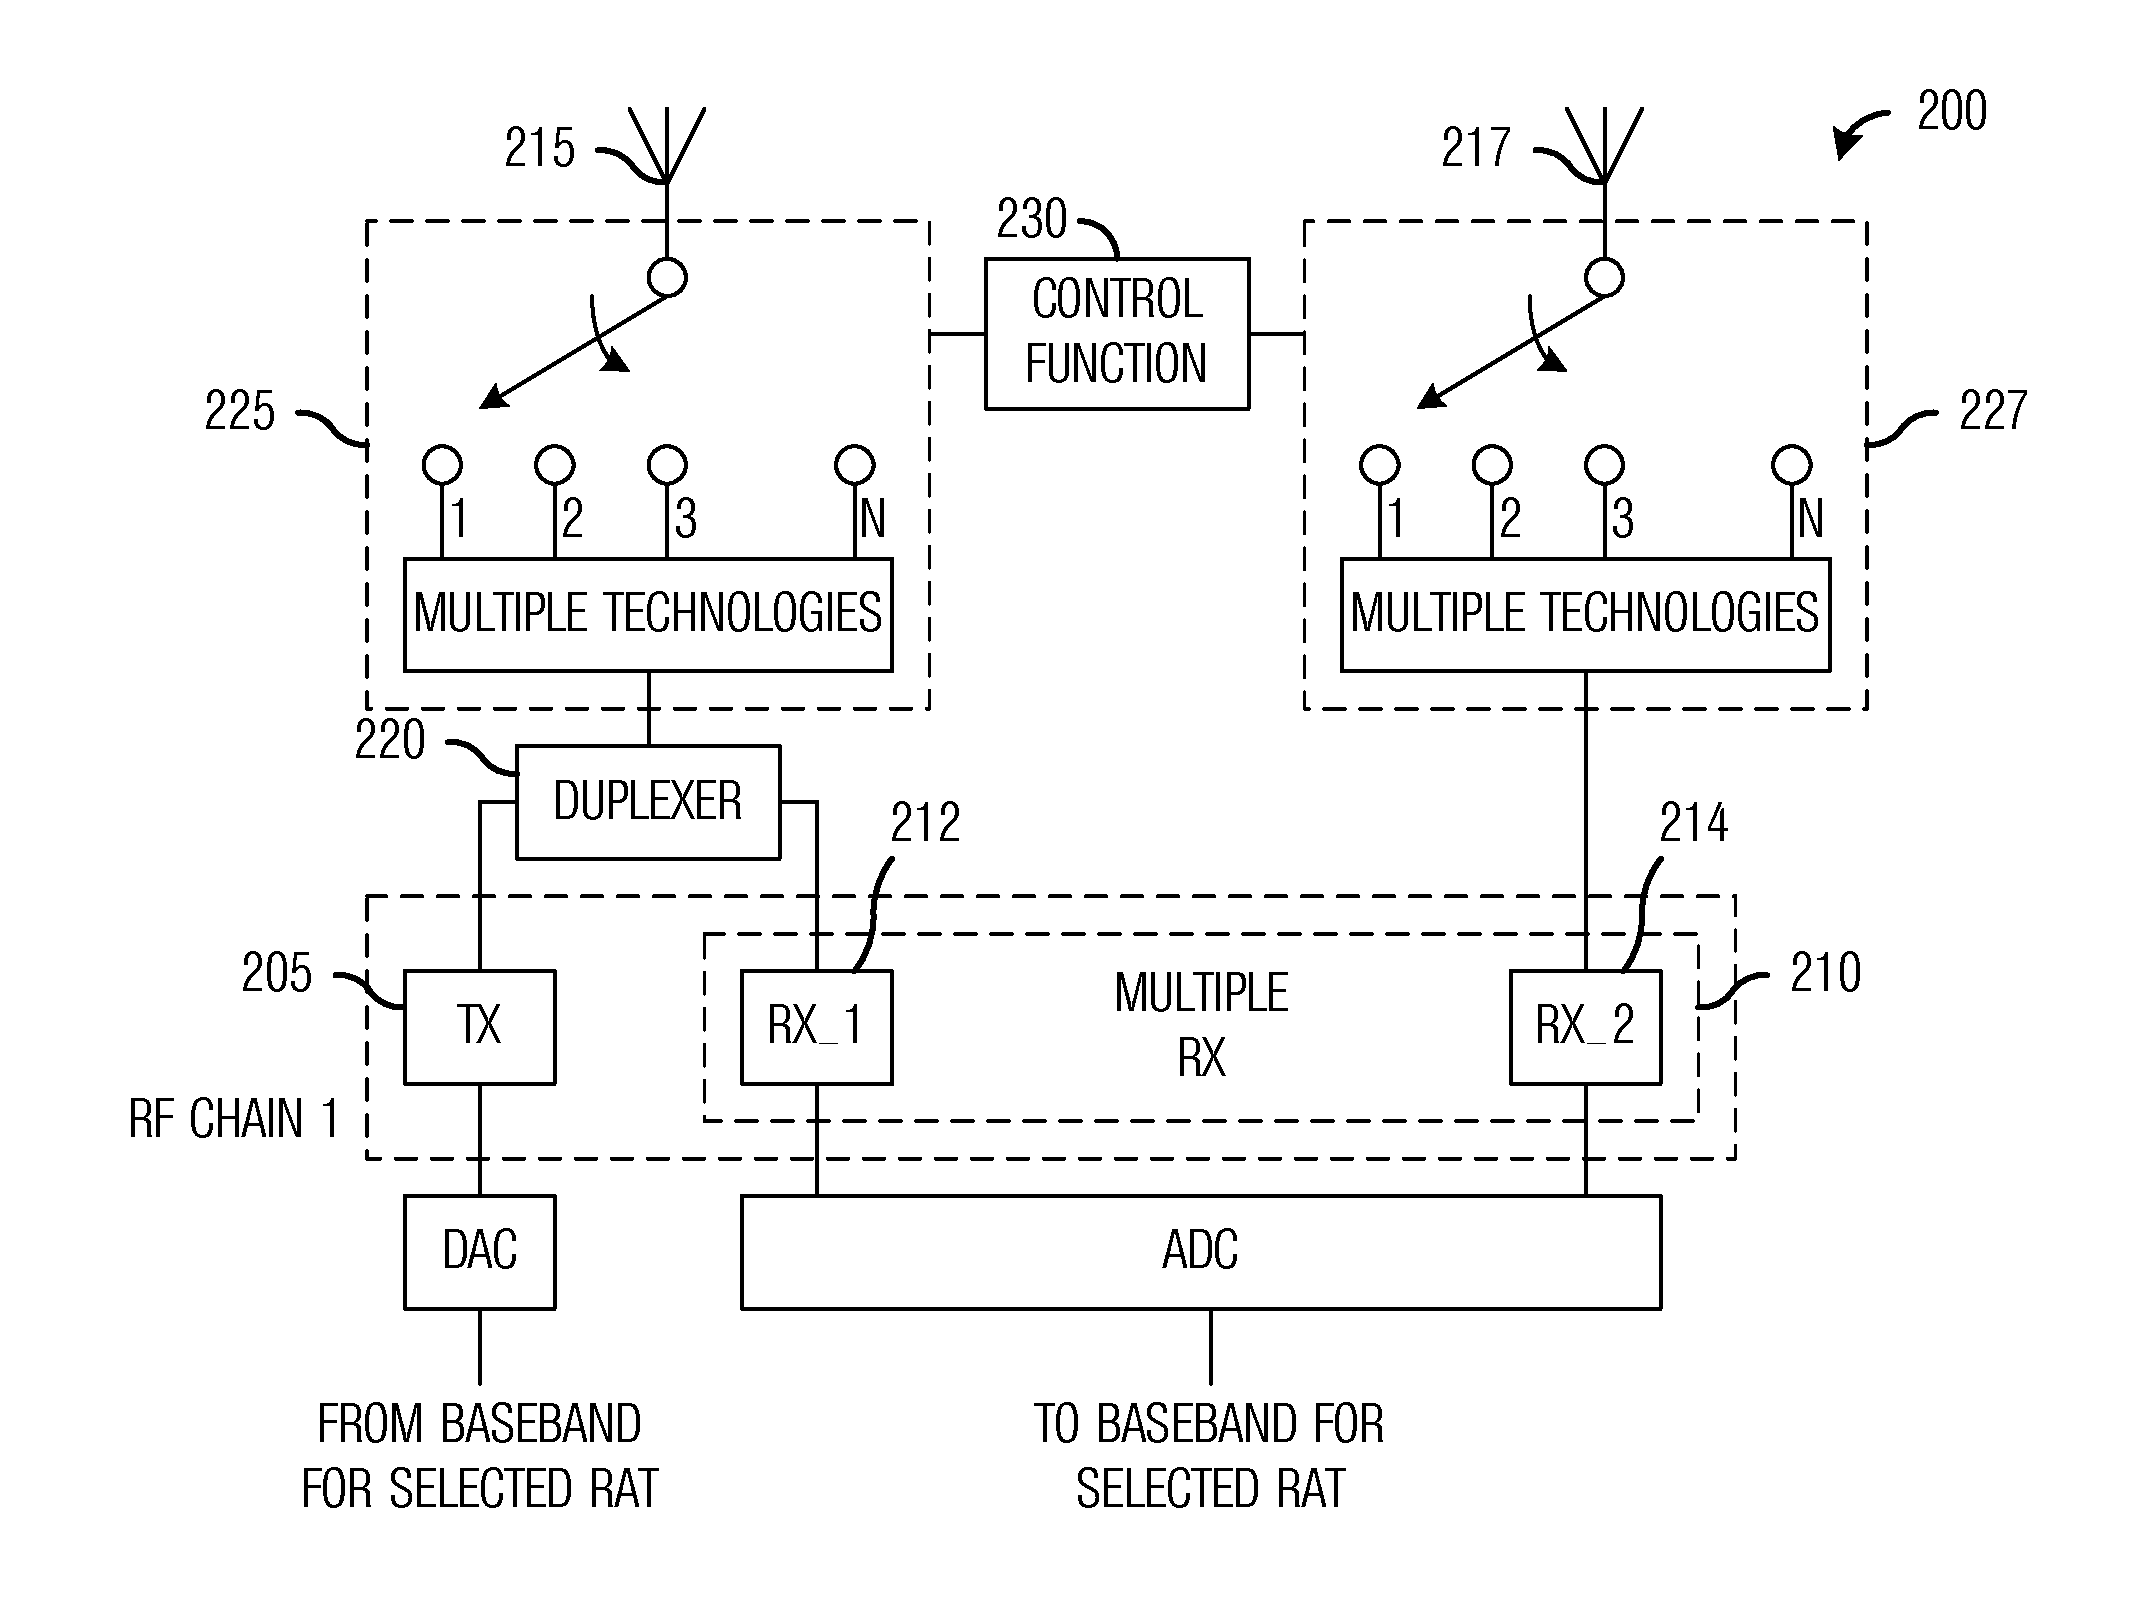 System and method for supporting handovers between different radio access technologies of a wireless communications system